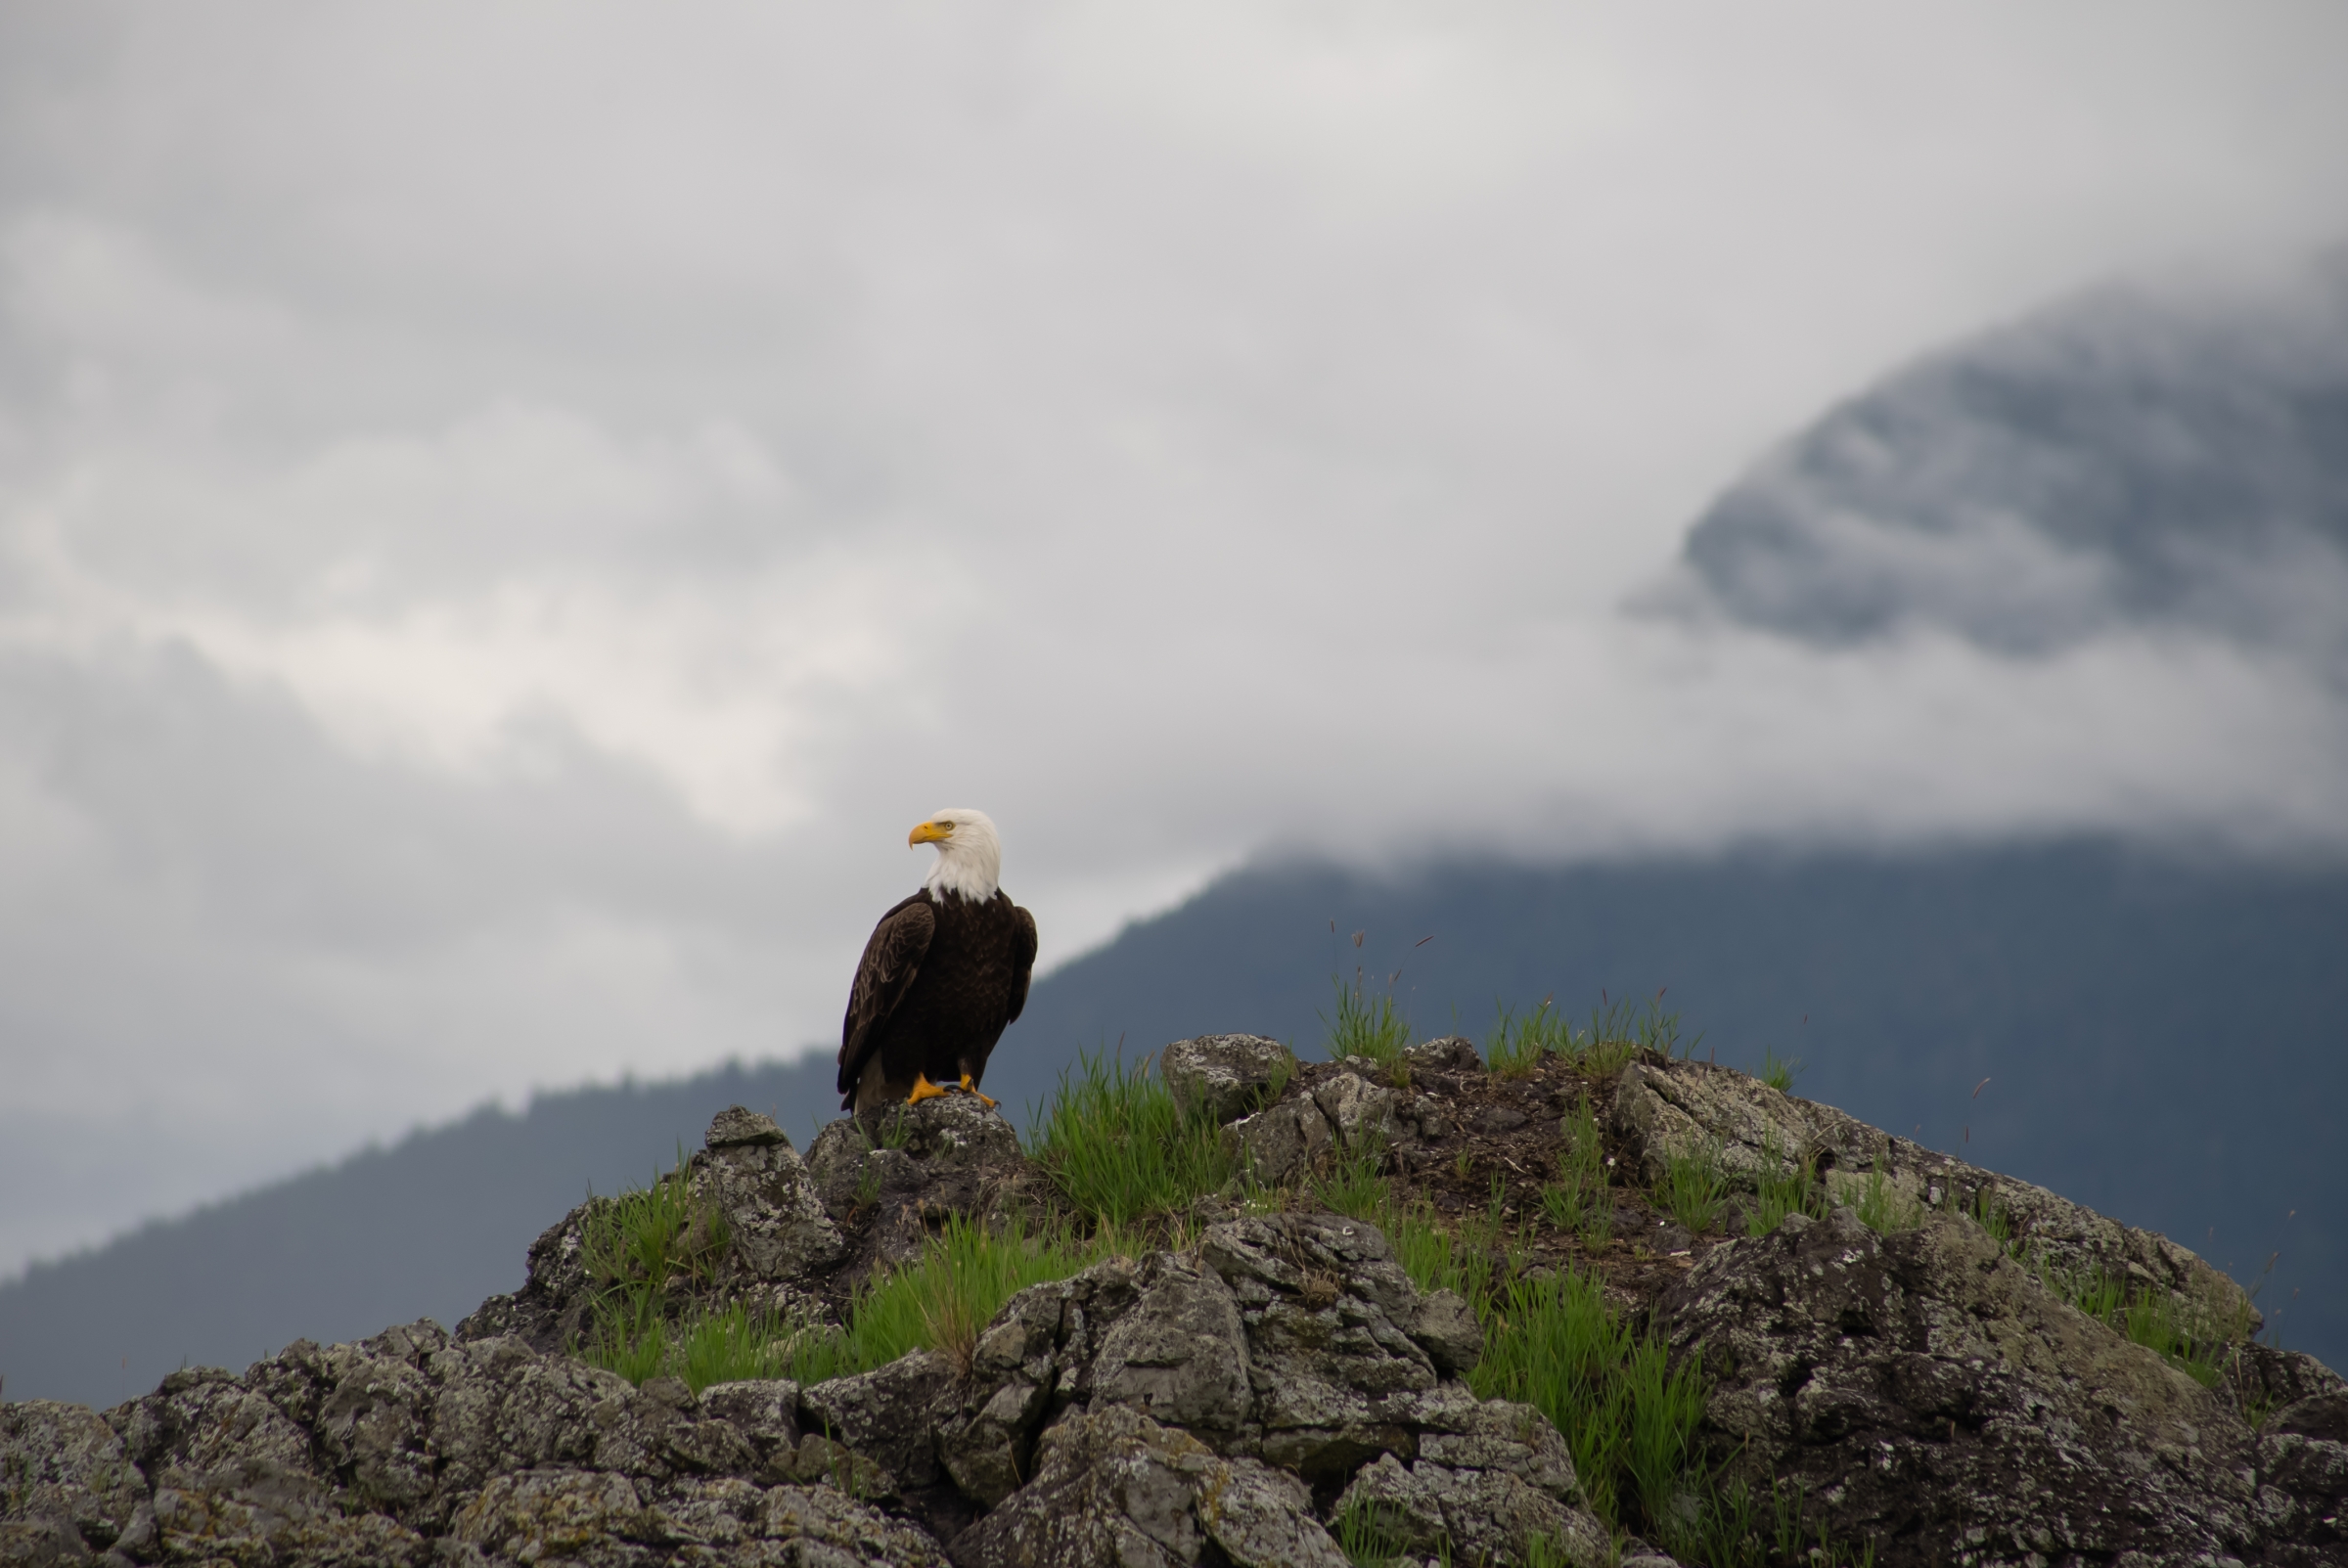 A bald eagle perched on a rock by the ocean